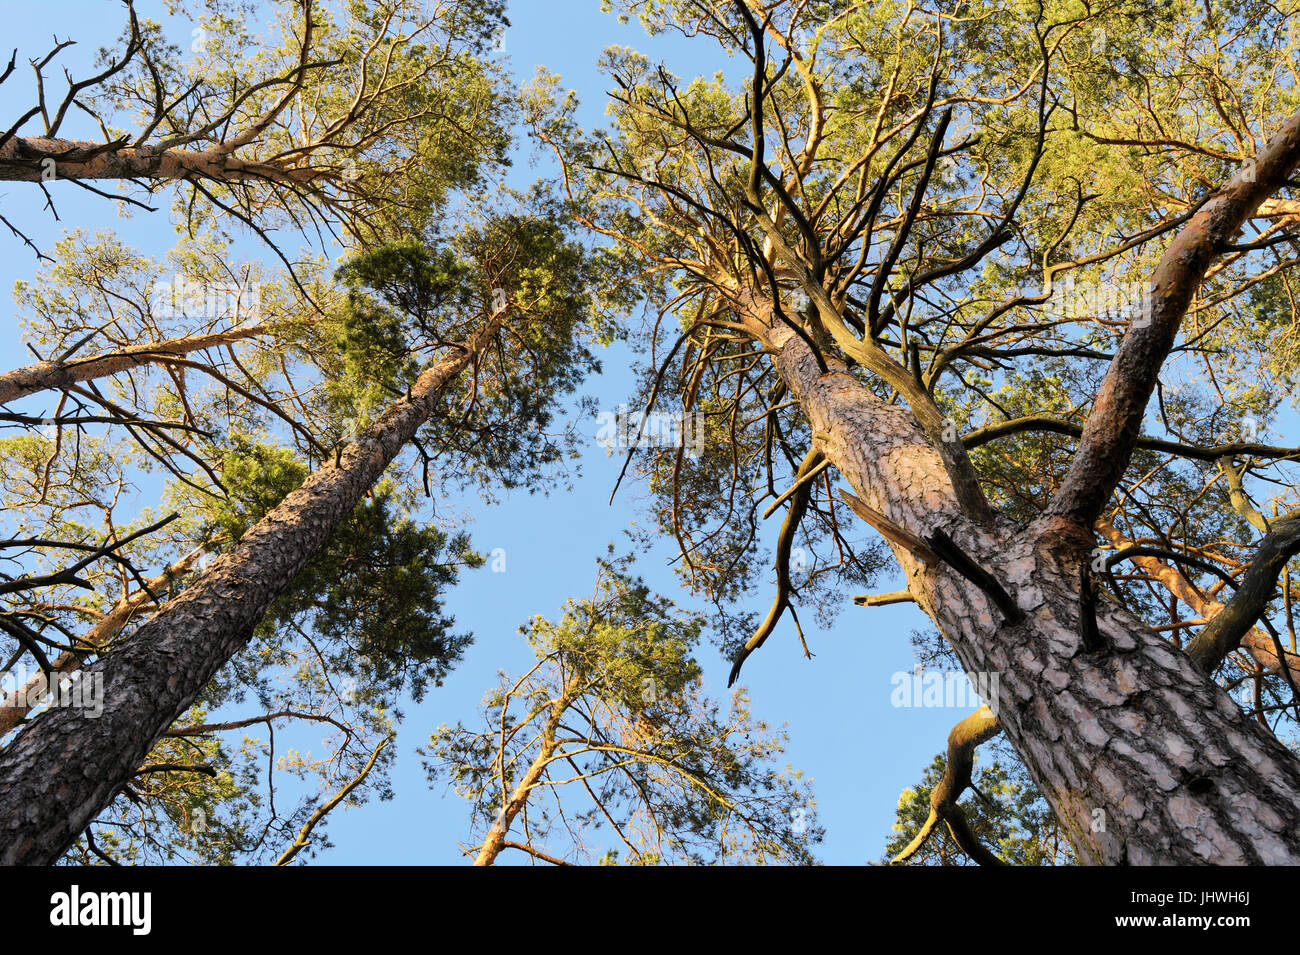 Crowns of Scots or Scotch pine Pinus sylvestris trees growing in evergreen coniferous wood. Forest canopy view from below. Pomerania, Poland. Stock Photo